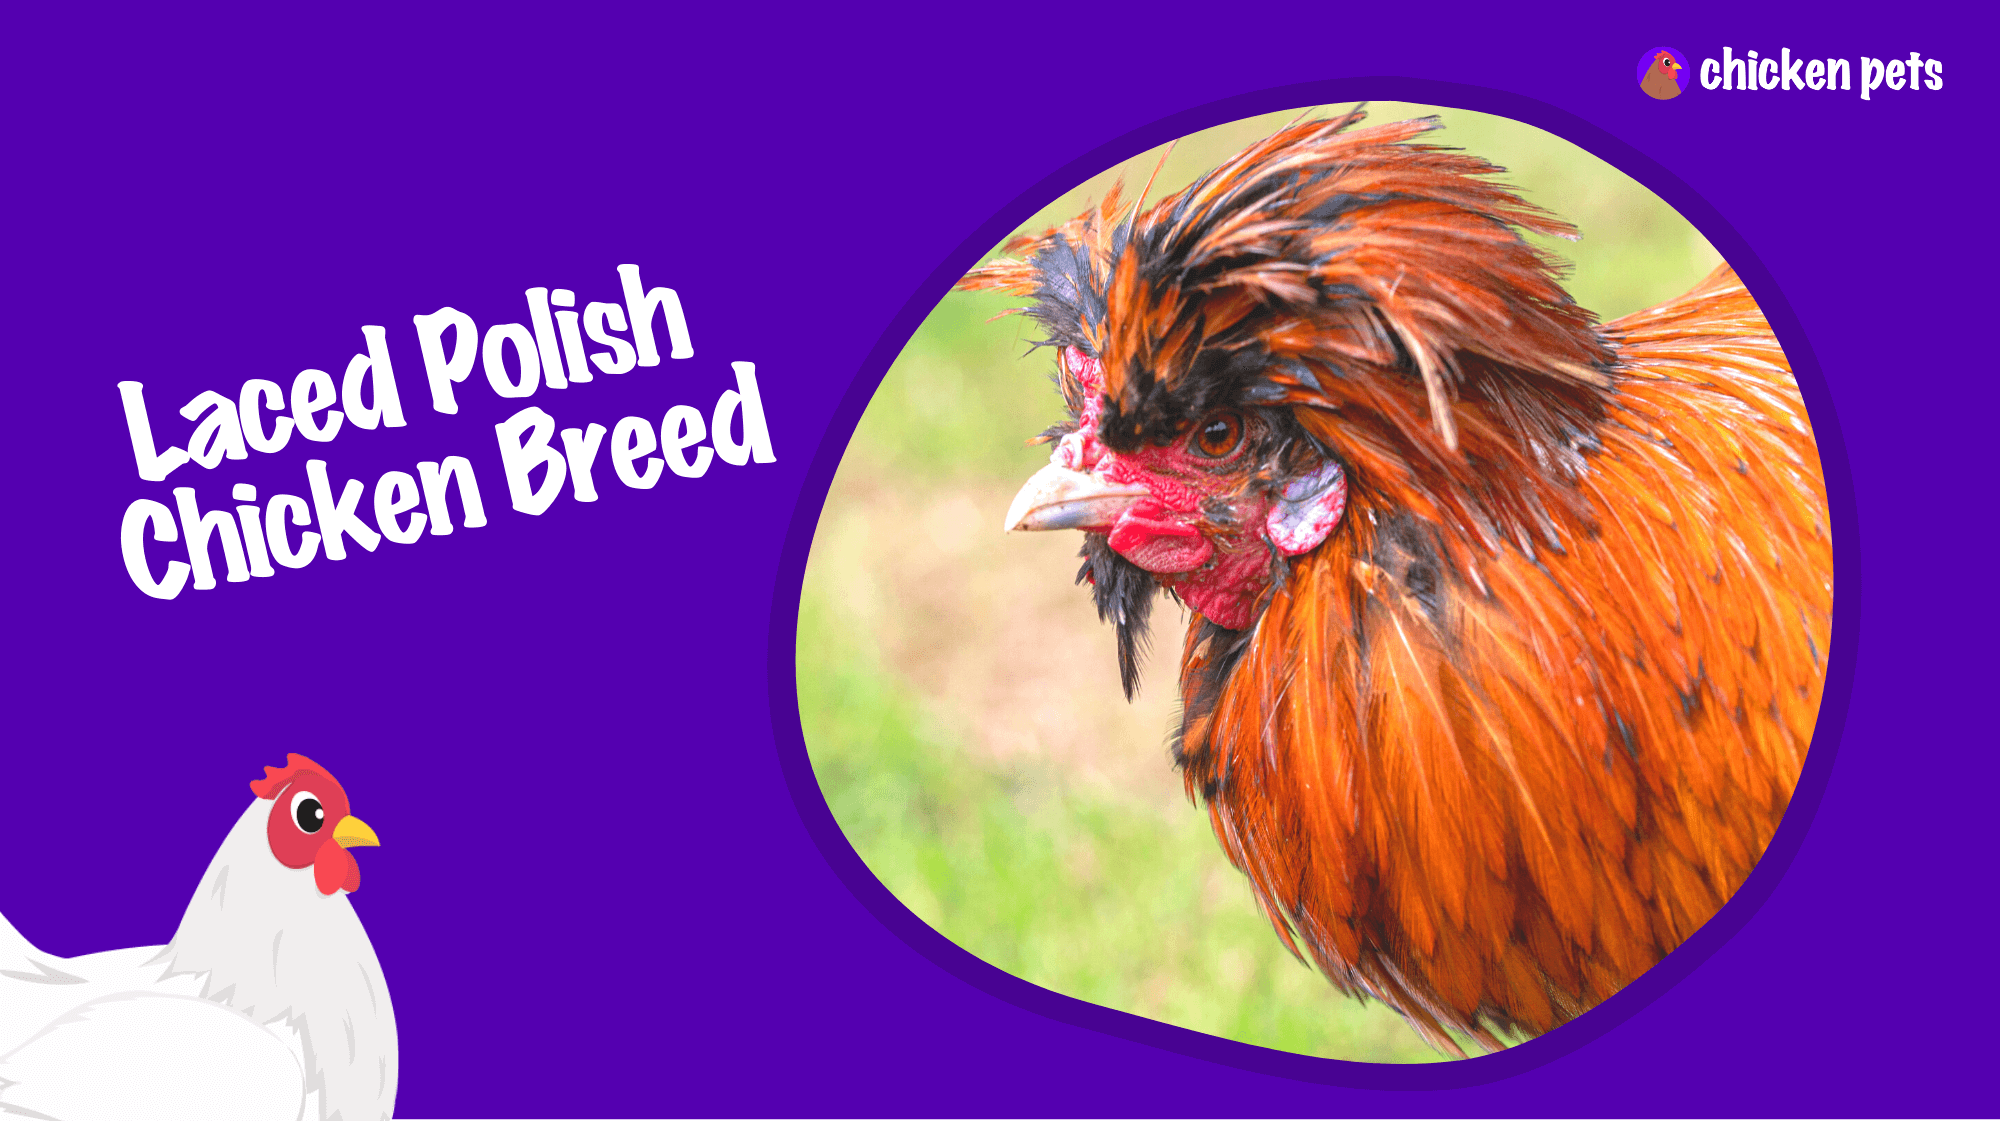 Laced Polish chicken breed